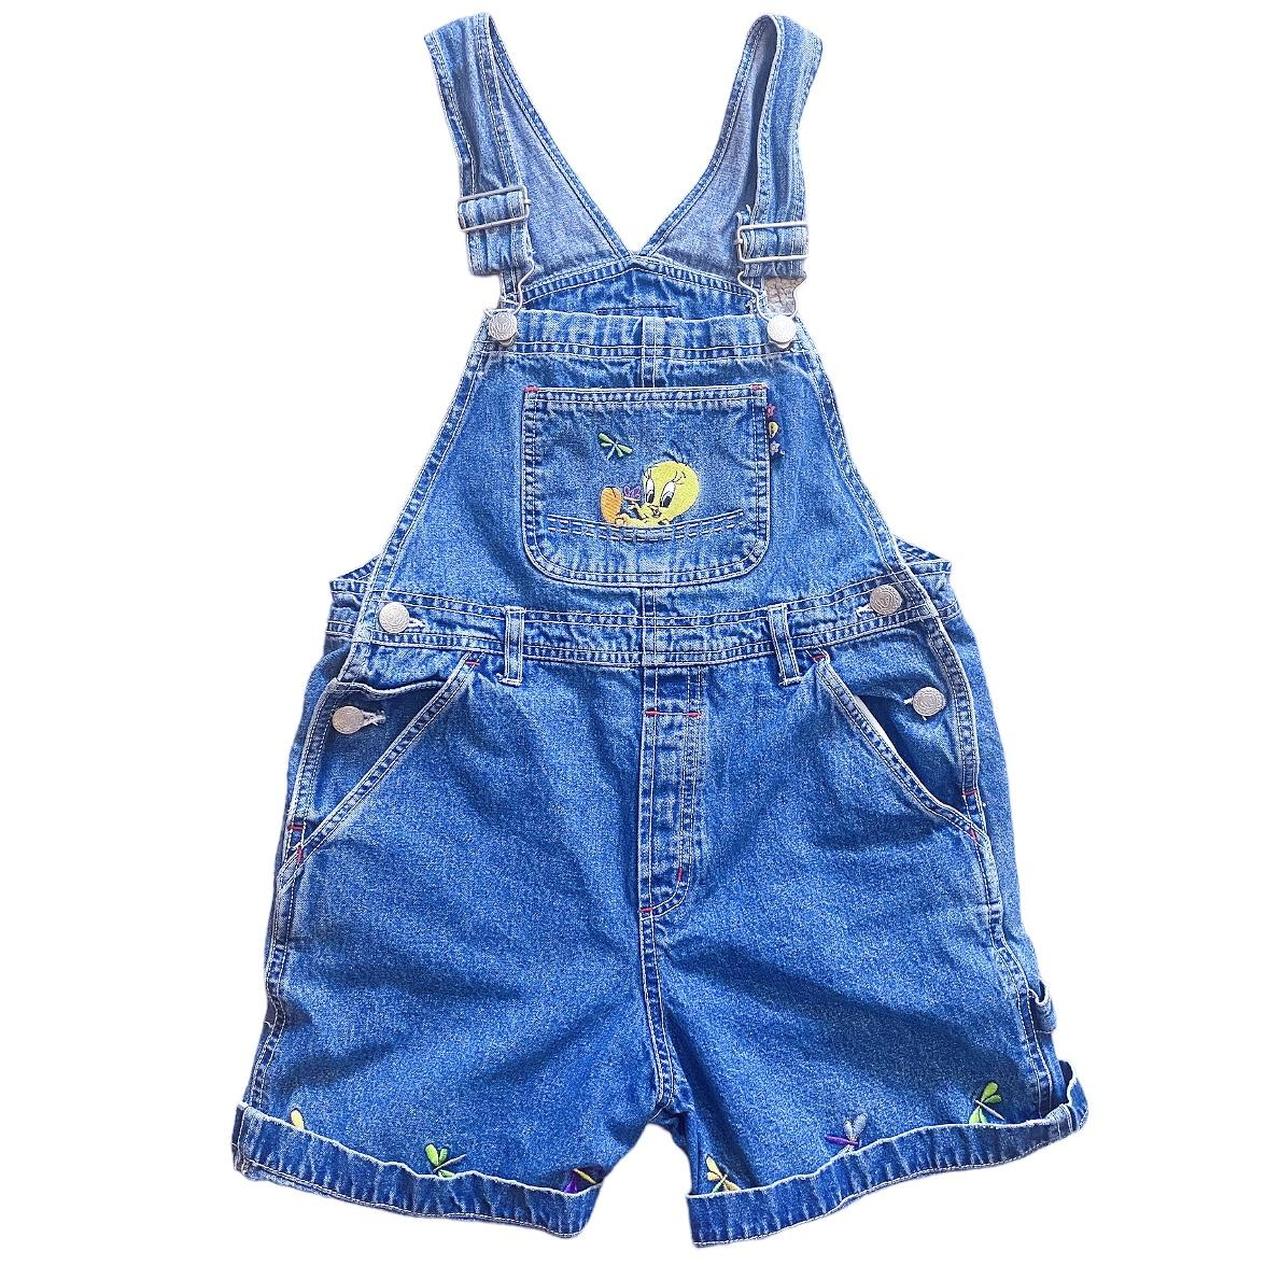 Looney Tunes Women's Blue and Yellow Dungarees-overalls